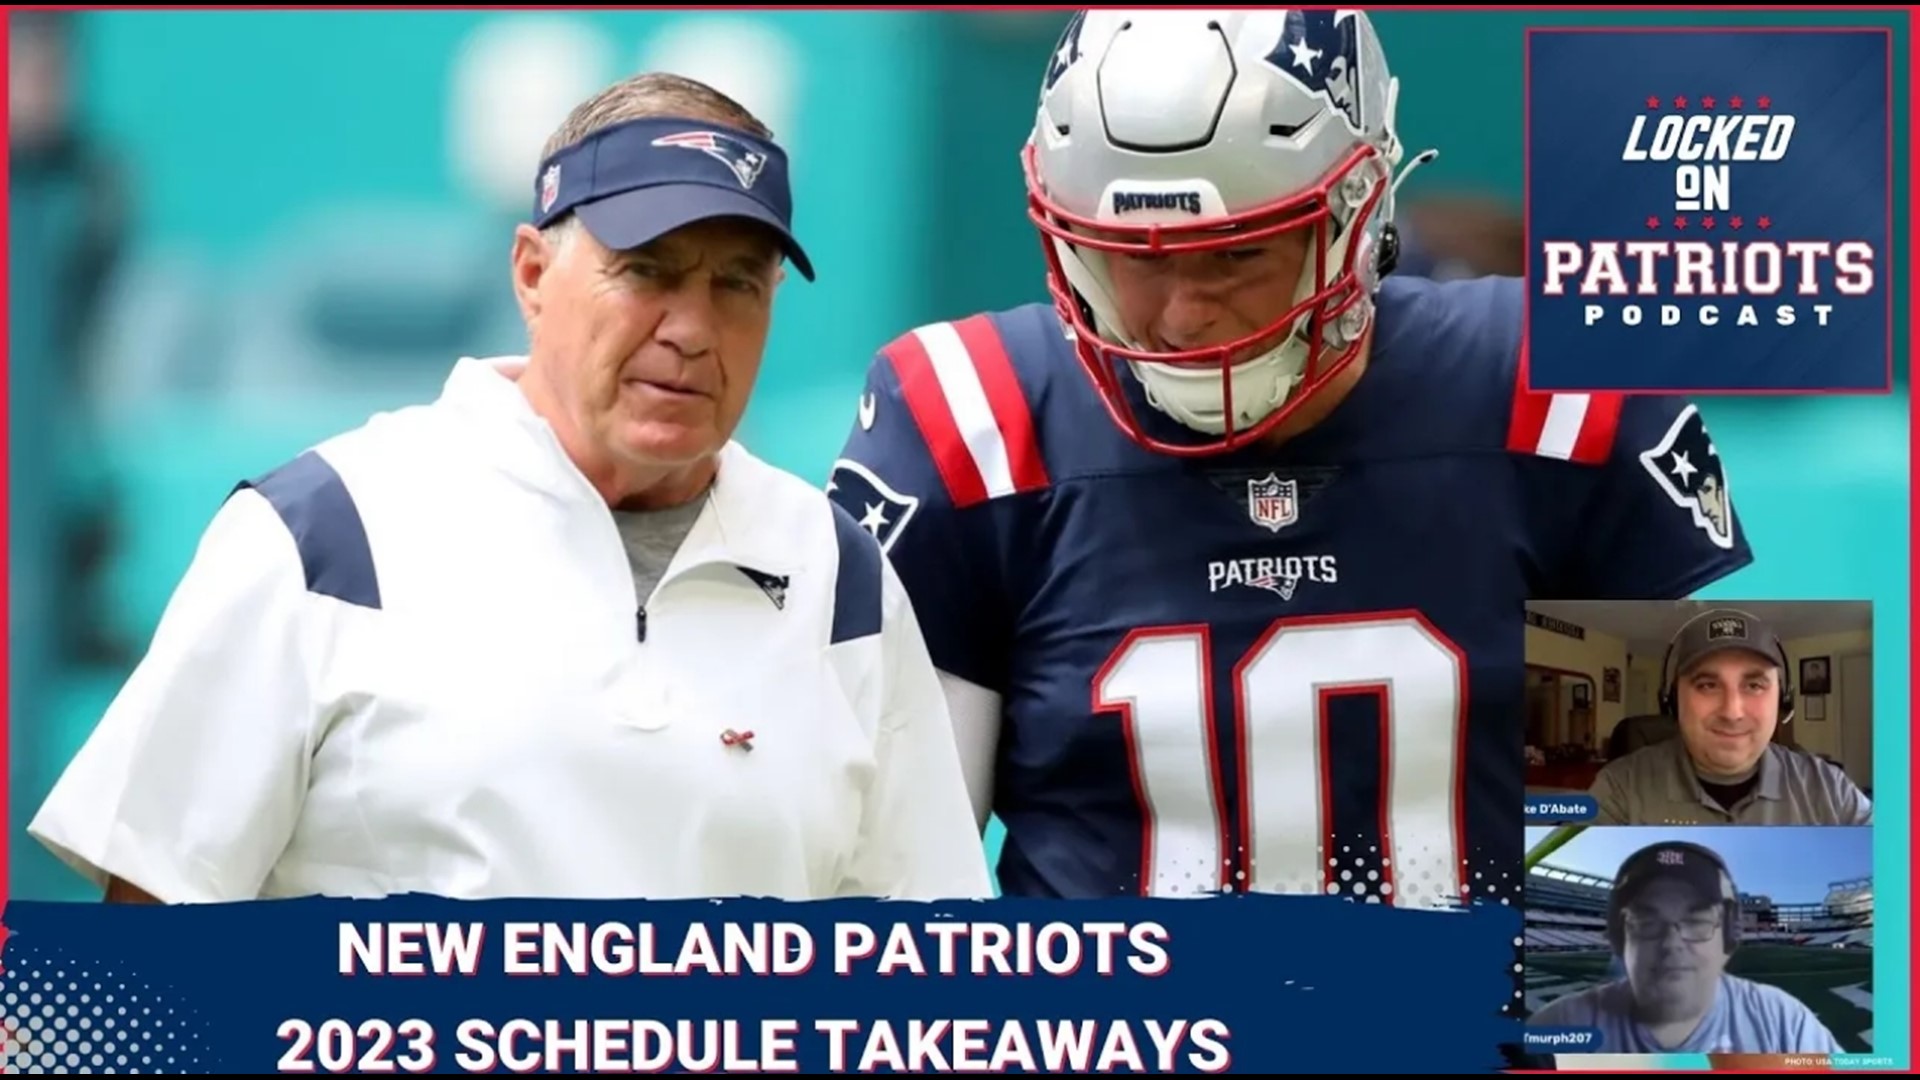 The Patriots face a gauntlet to open the season, en route to compiling one of the toughest schedules in the NFL.